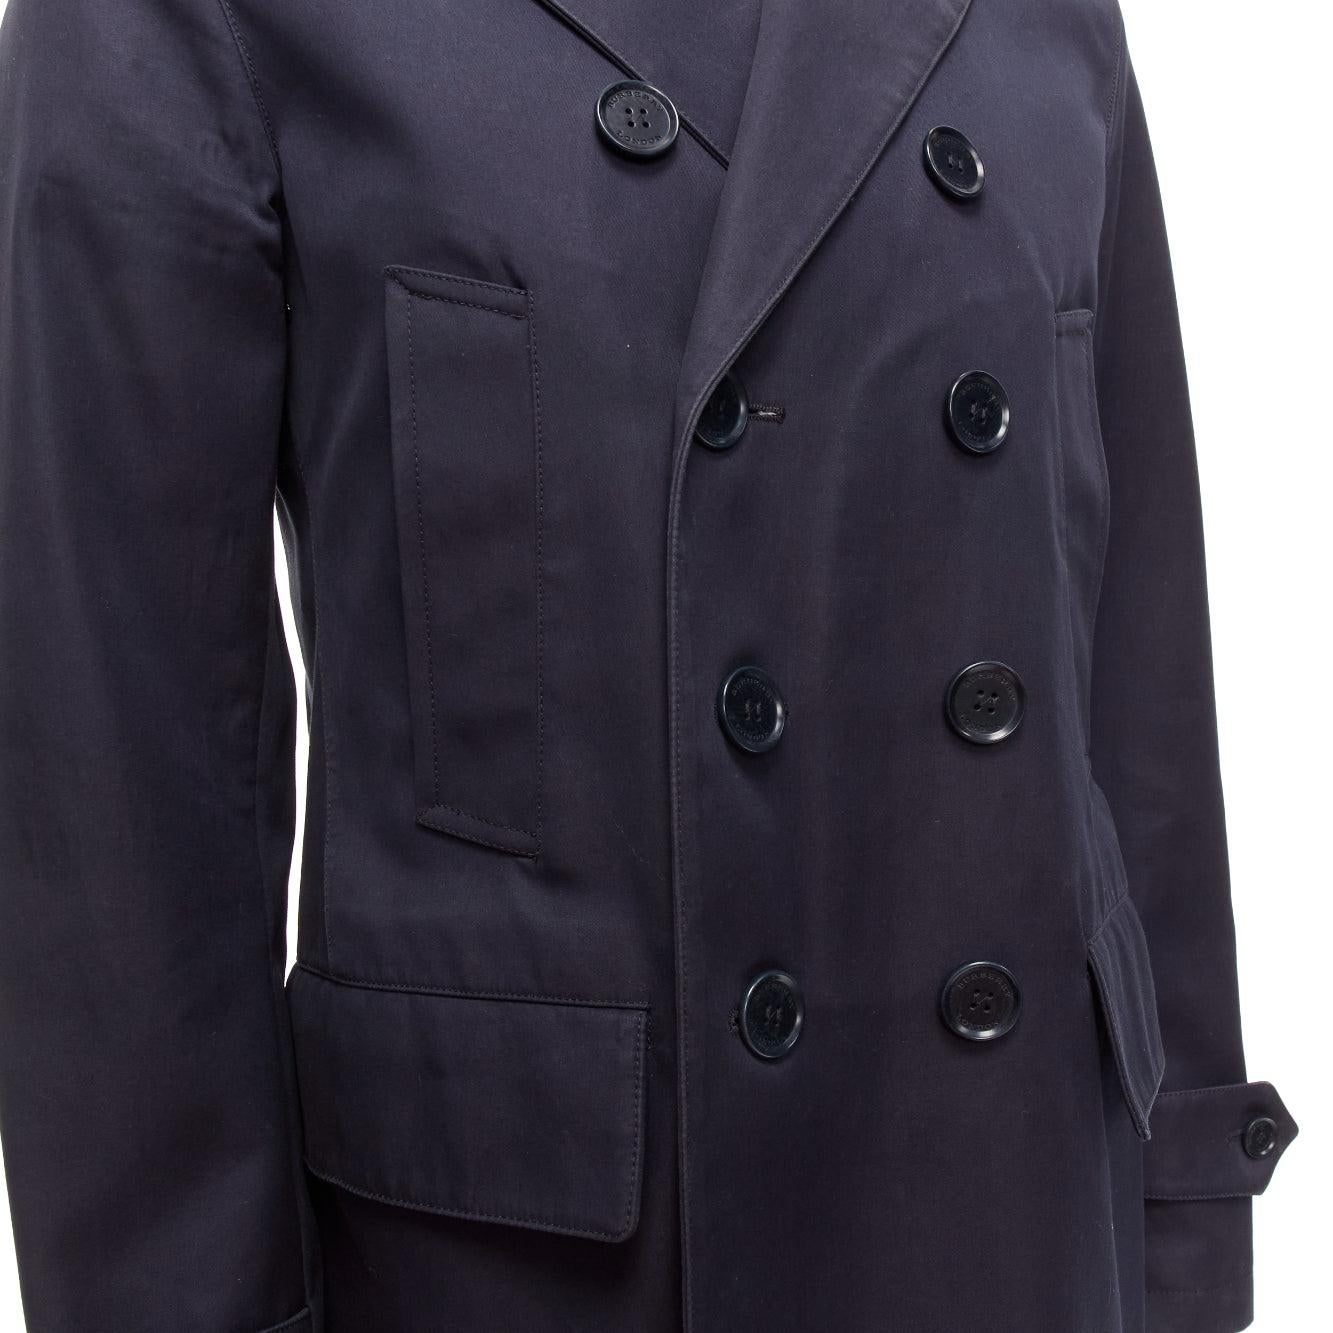 BURBERRY navy cotton wool lined leather epaulet short trench coat IT48 M
Reference: MLCO/A00003
Brand: Burberry
Designer: Christopher Bailey
Material: Cotton
Color: Navy, Black
Pattern: Solid
Closure: Button
Lining: Multicolour Fabric
Extra Details: